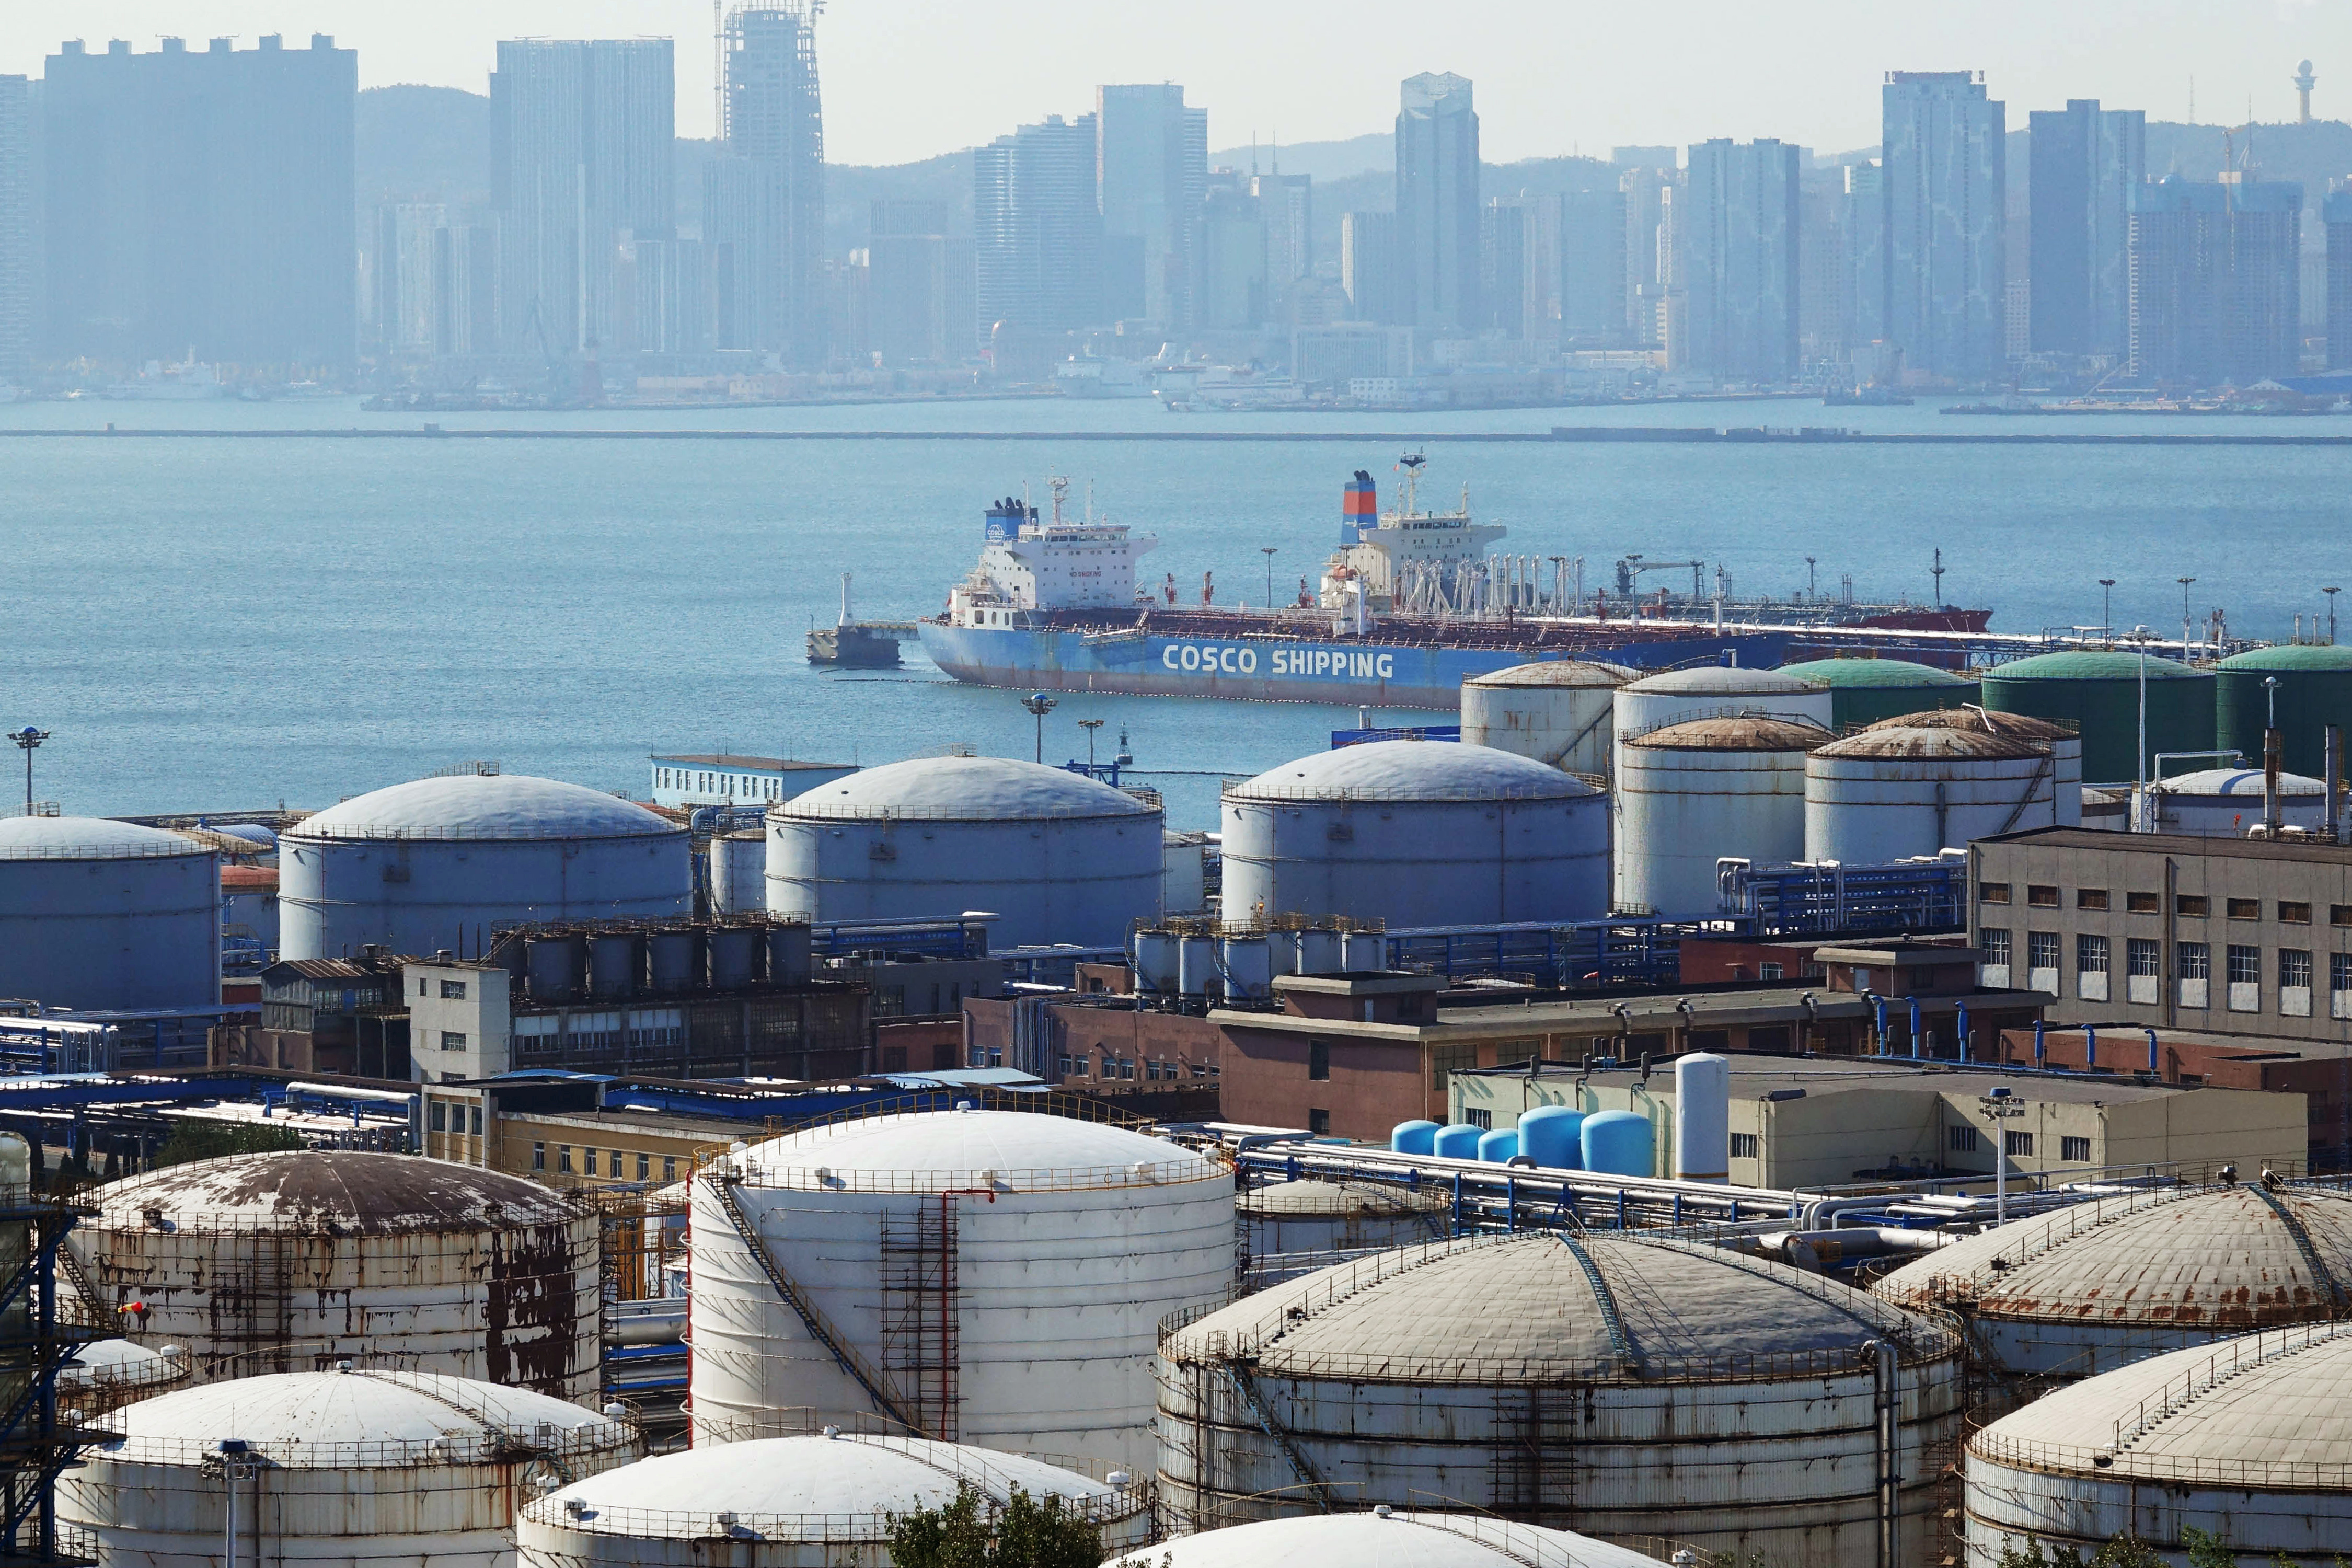 China Ocean Shipping Company (COSCO) vessel is seen near oil tanks at the China National Petroleum Corporation (CNPC)'s Dalian Petrochemical Corp in Dalian